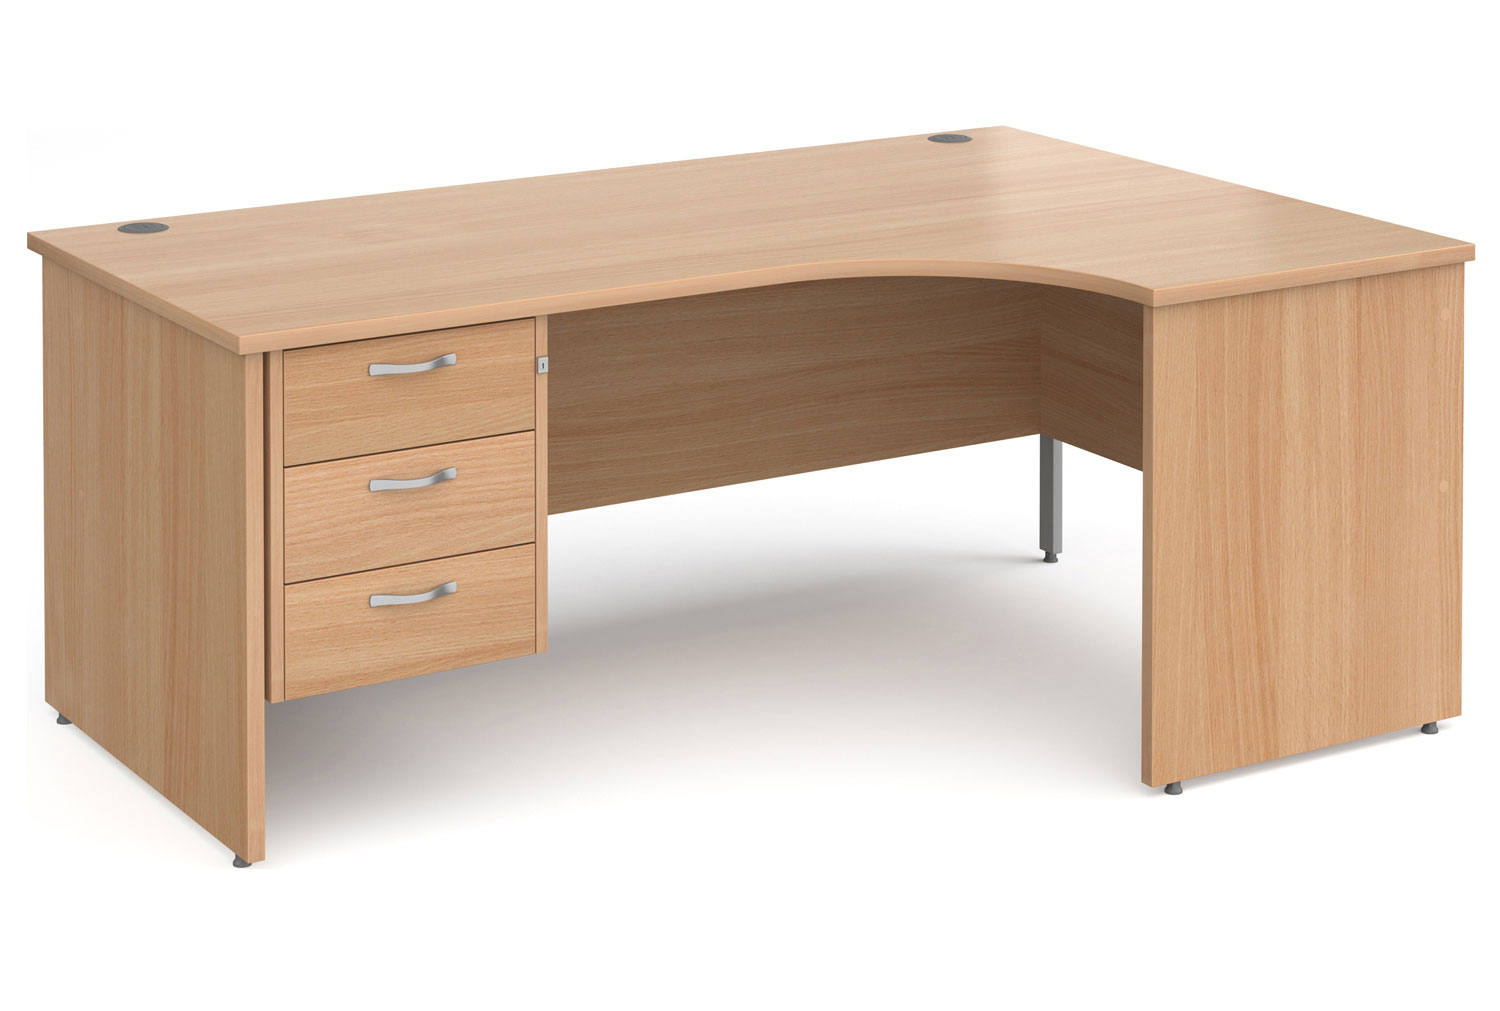 Tully Panel End Right Hand Ergonomic Office Desk 3 Drawers, 180wx120/80dx73h (cm), Beech, Fully Installed